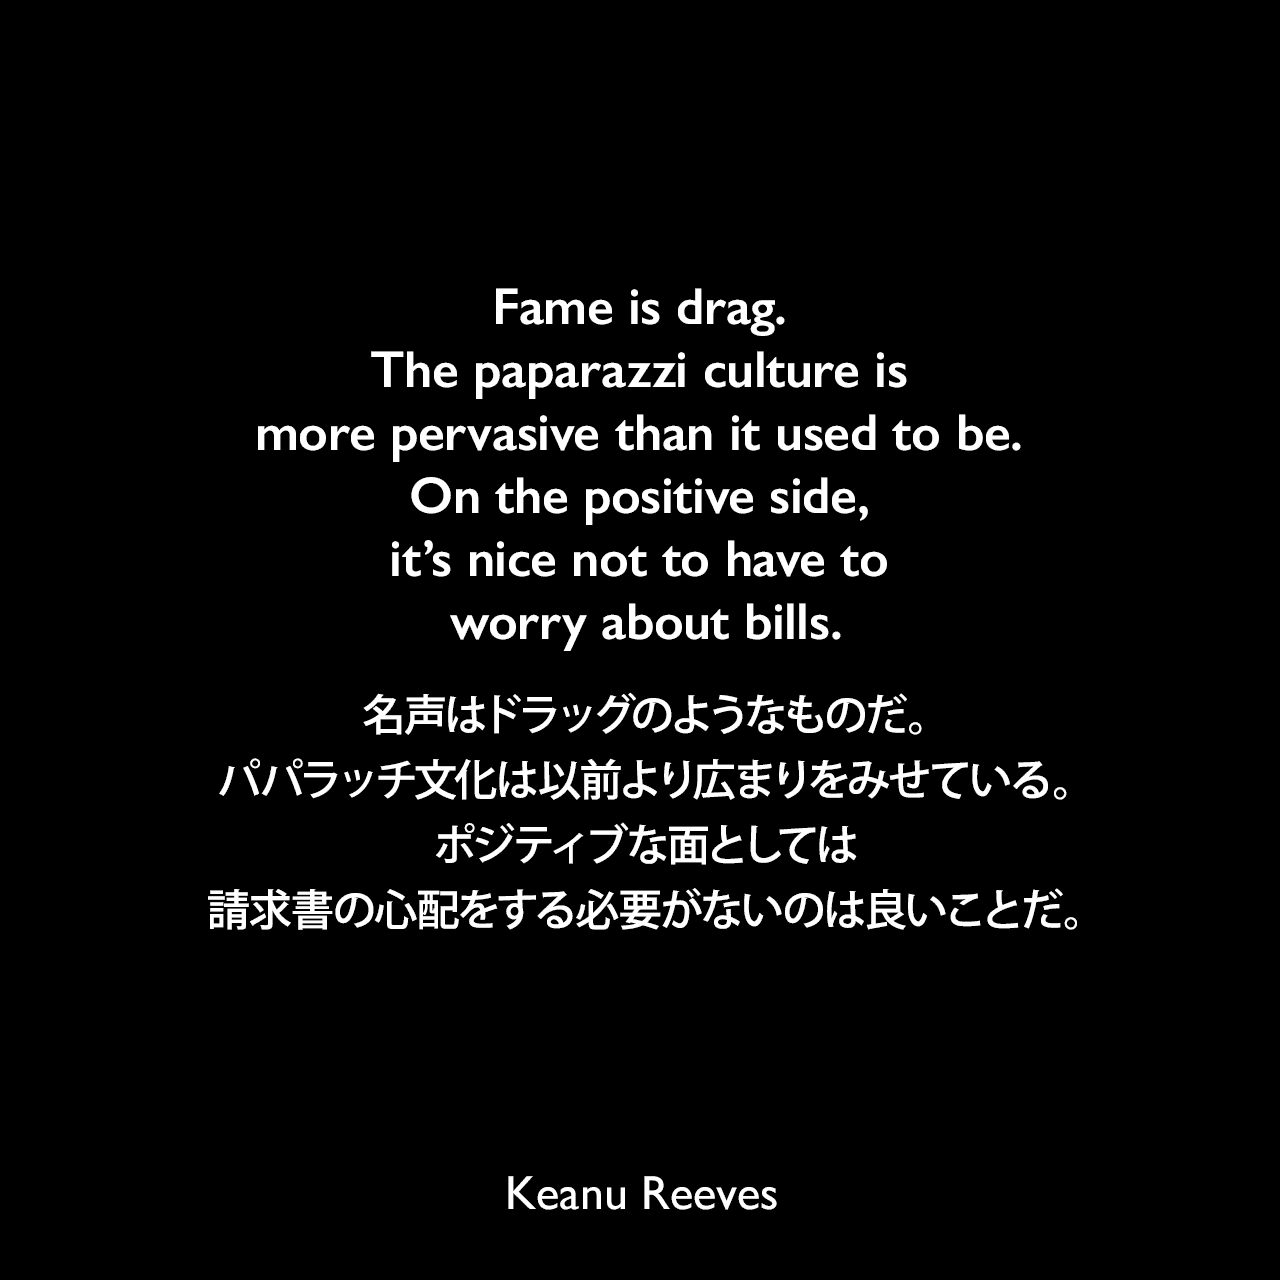 Fame is drag. The paparazzi culture is more pervasive than it used to be. On the positive side, it’s nice not to have to worry about bills.名声はドラッグのようなものだ。パパラッチ文化は以前より広まりをみせている。ポジティブな面としては、請求書の心配をする必要がないのは良いことだ。Keanu Reeves